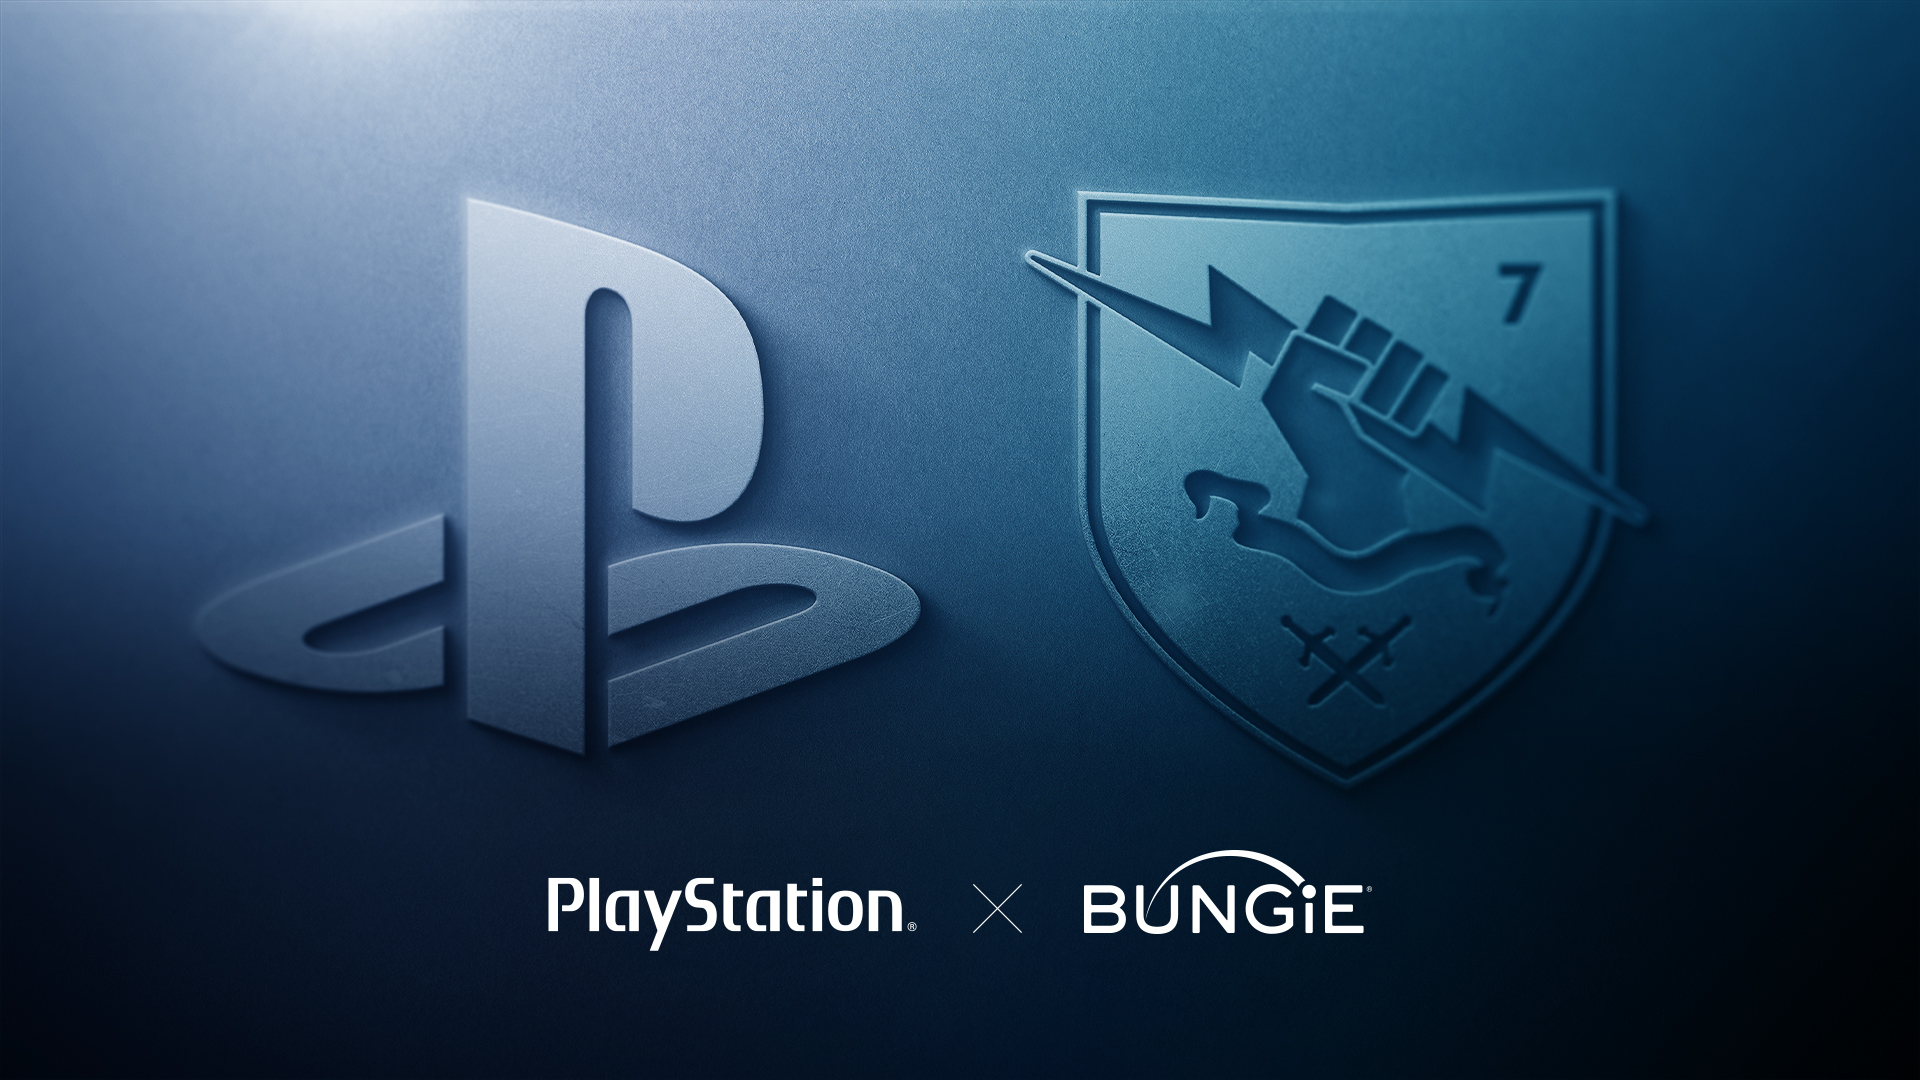 PlayStation on "Bungie is joining PlayStation. Here's what to expect from this exciting news: https://t.co/s1L3PhQ9vK https://t.co/0R1qhnEDKk" / Twitter